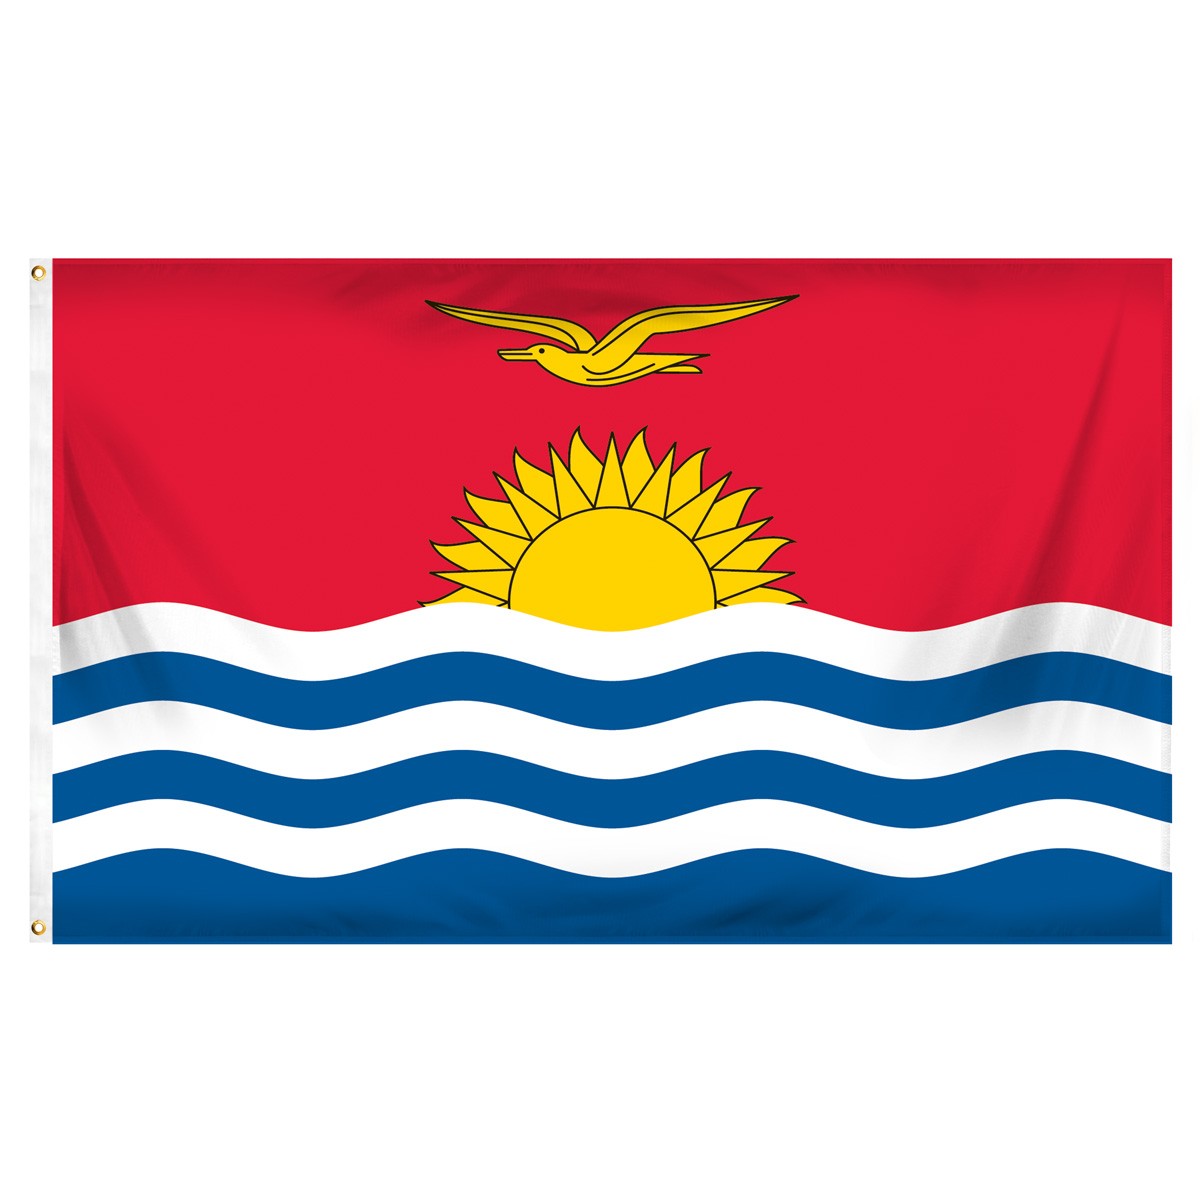 Kiribati Submit Flags and Flags